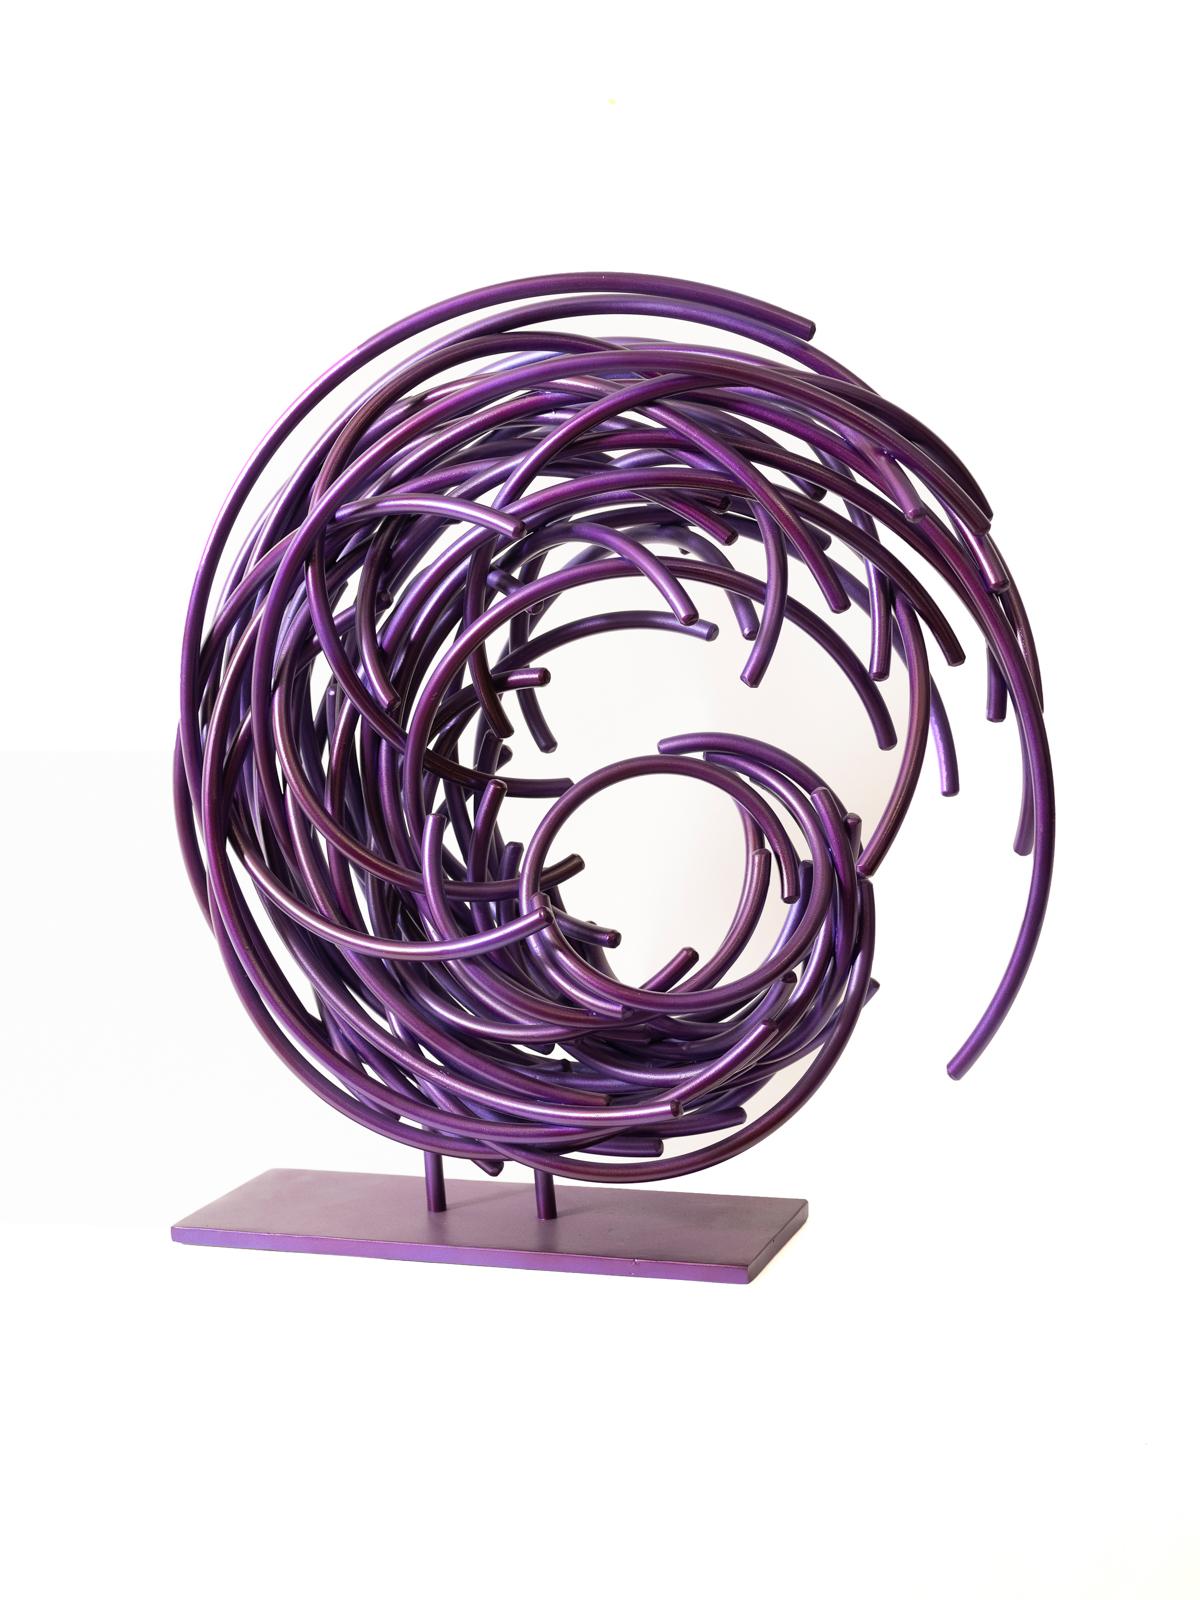 Shayne Dark Abstract Sculpture - Maelstrom Series No 5 - layered, intersecting, forged aluminum sculpture